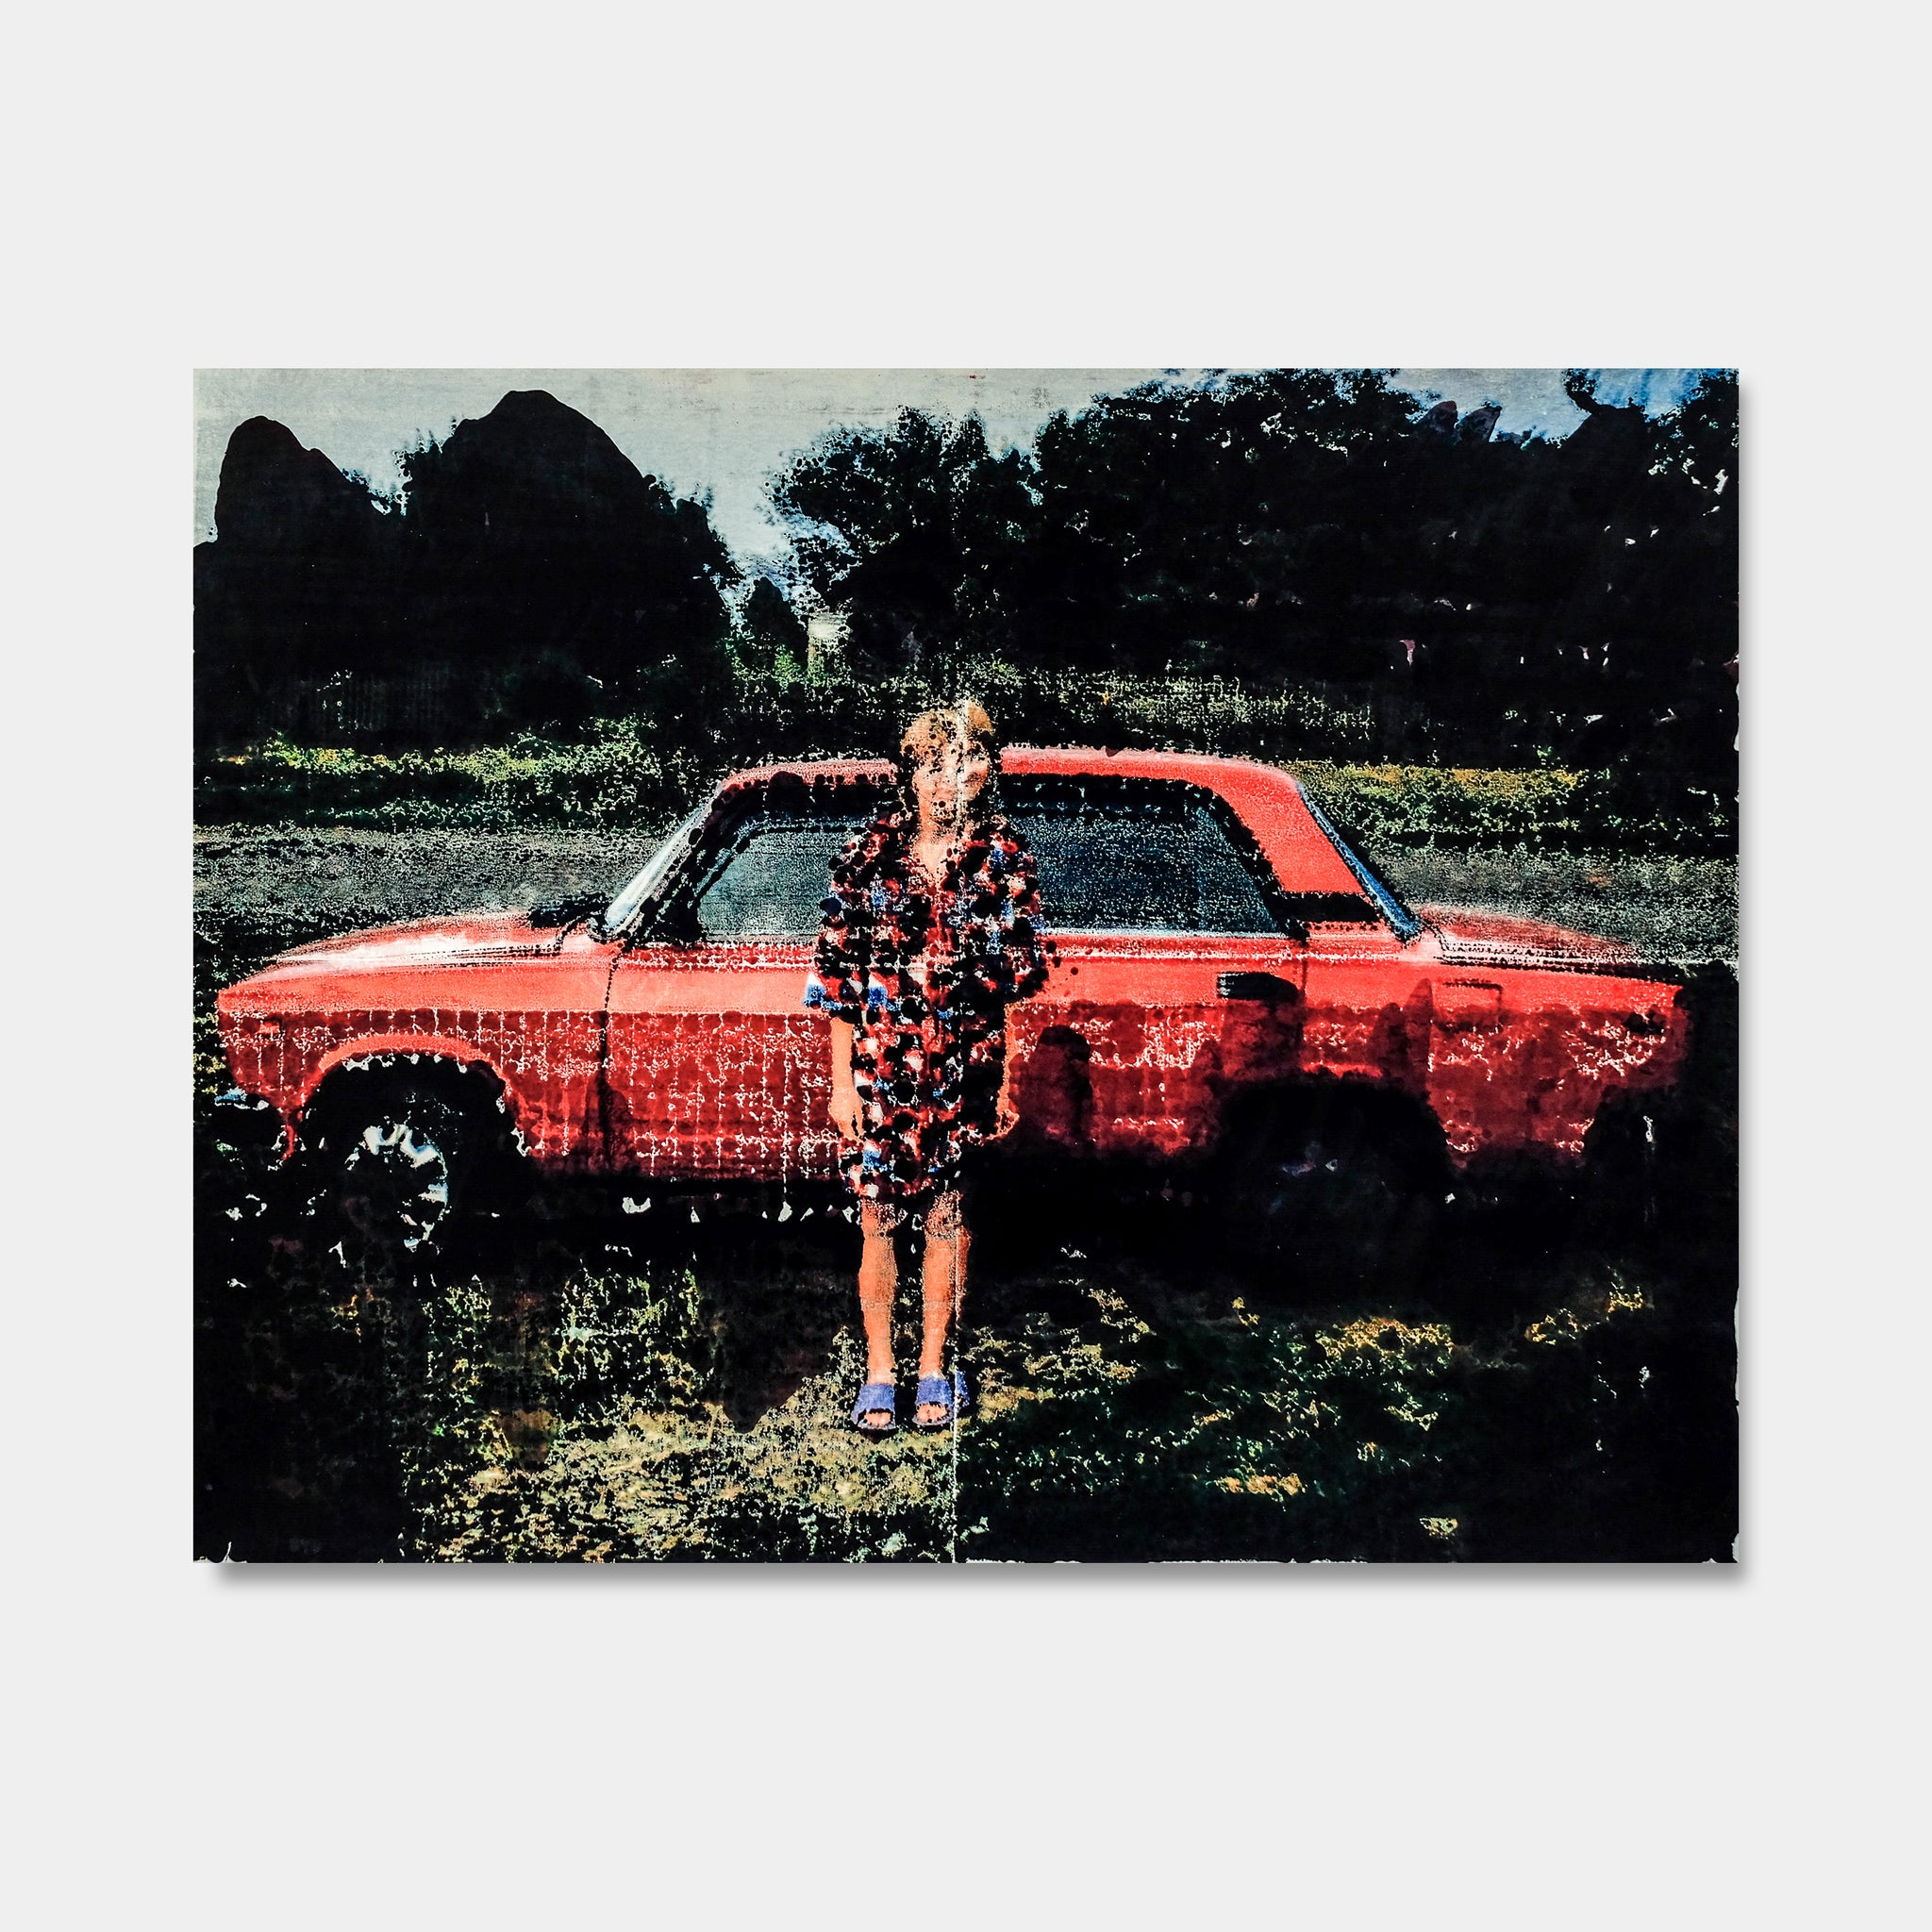 Artsuite - Red Car - Original artwork by Tim Lytvinenko of a boy standing in front of a red car.  Photograph - photo transfer on archival paper.   22 x 17 inches.